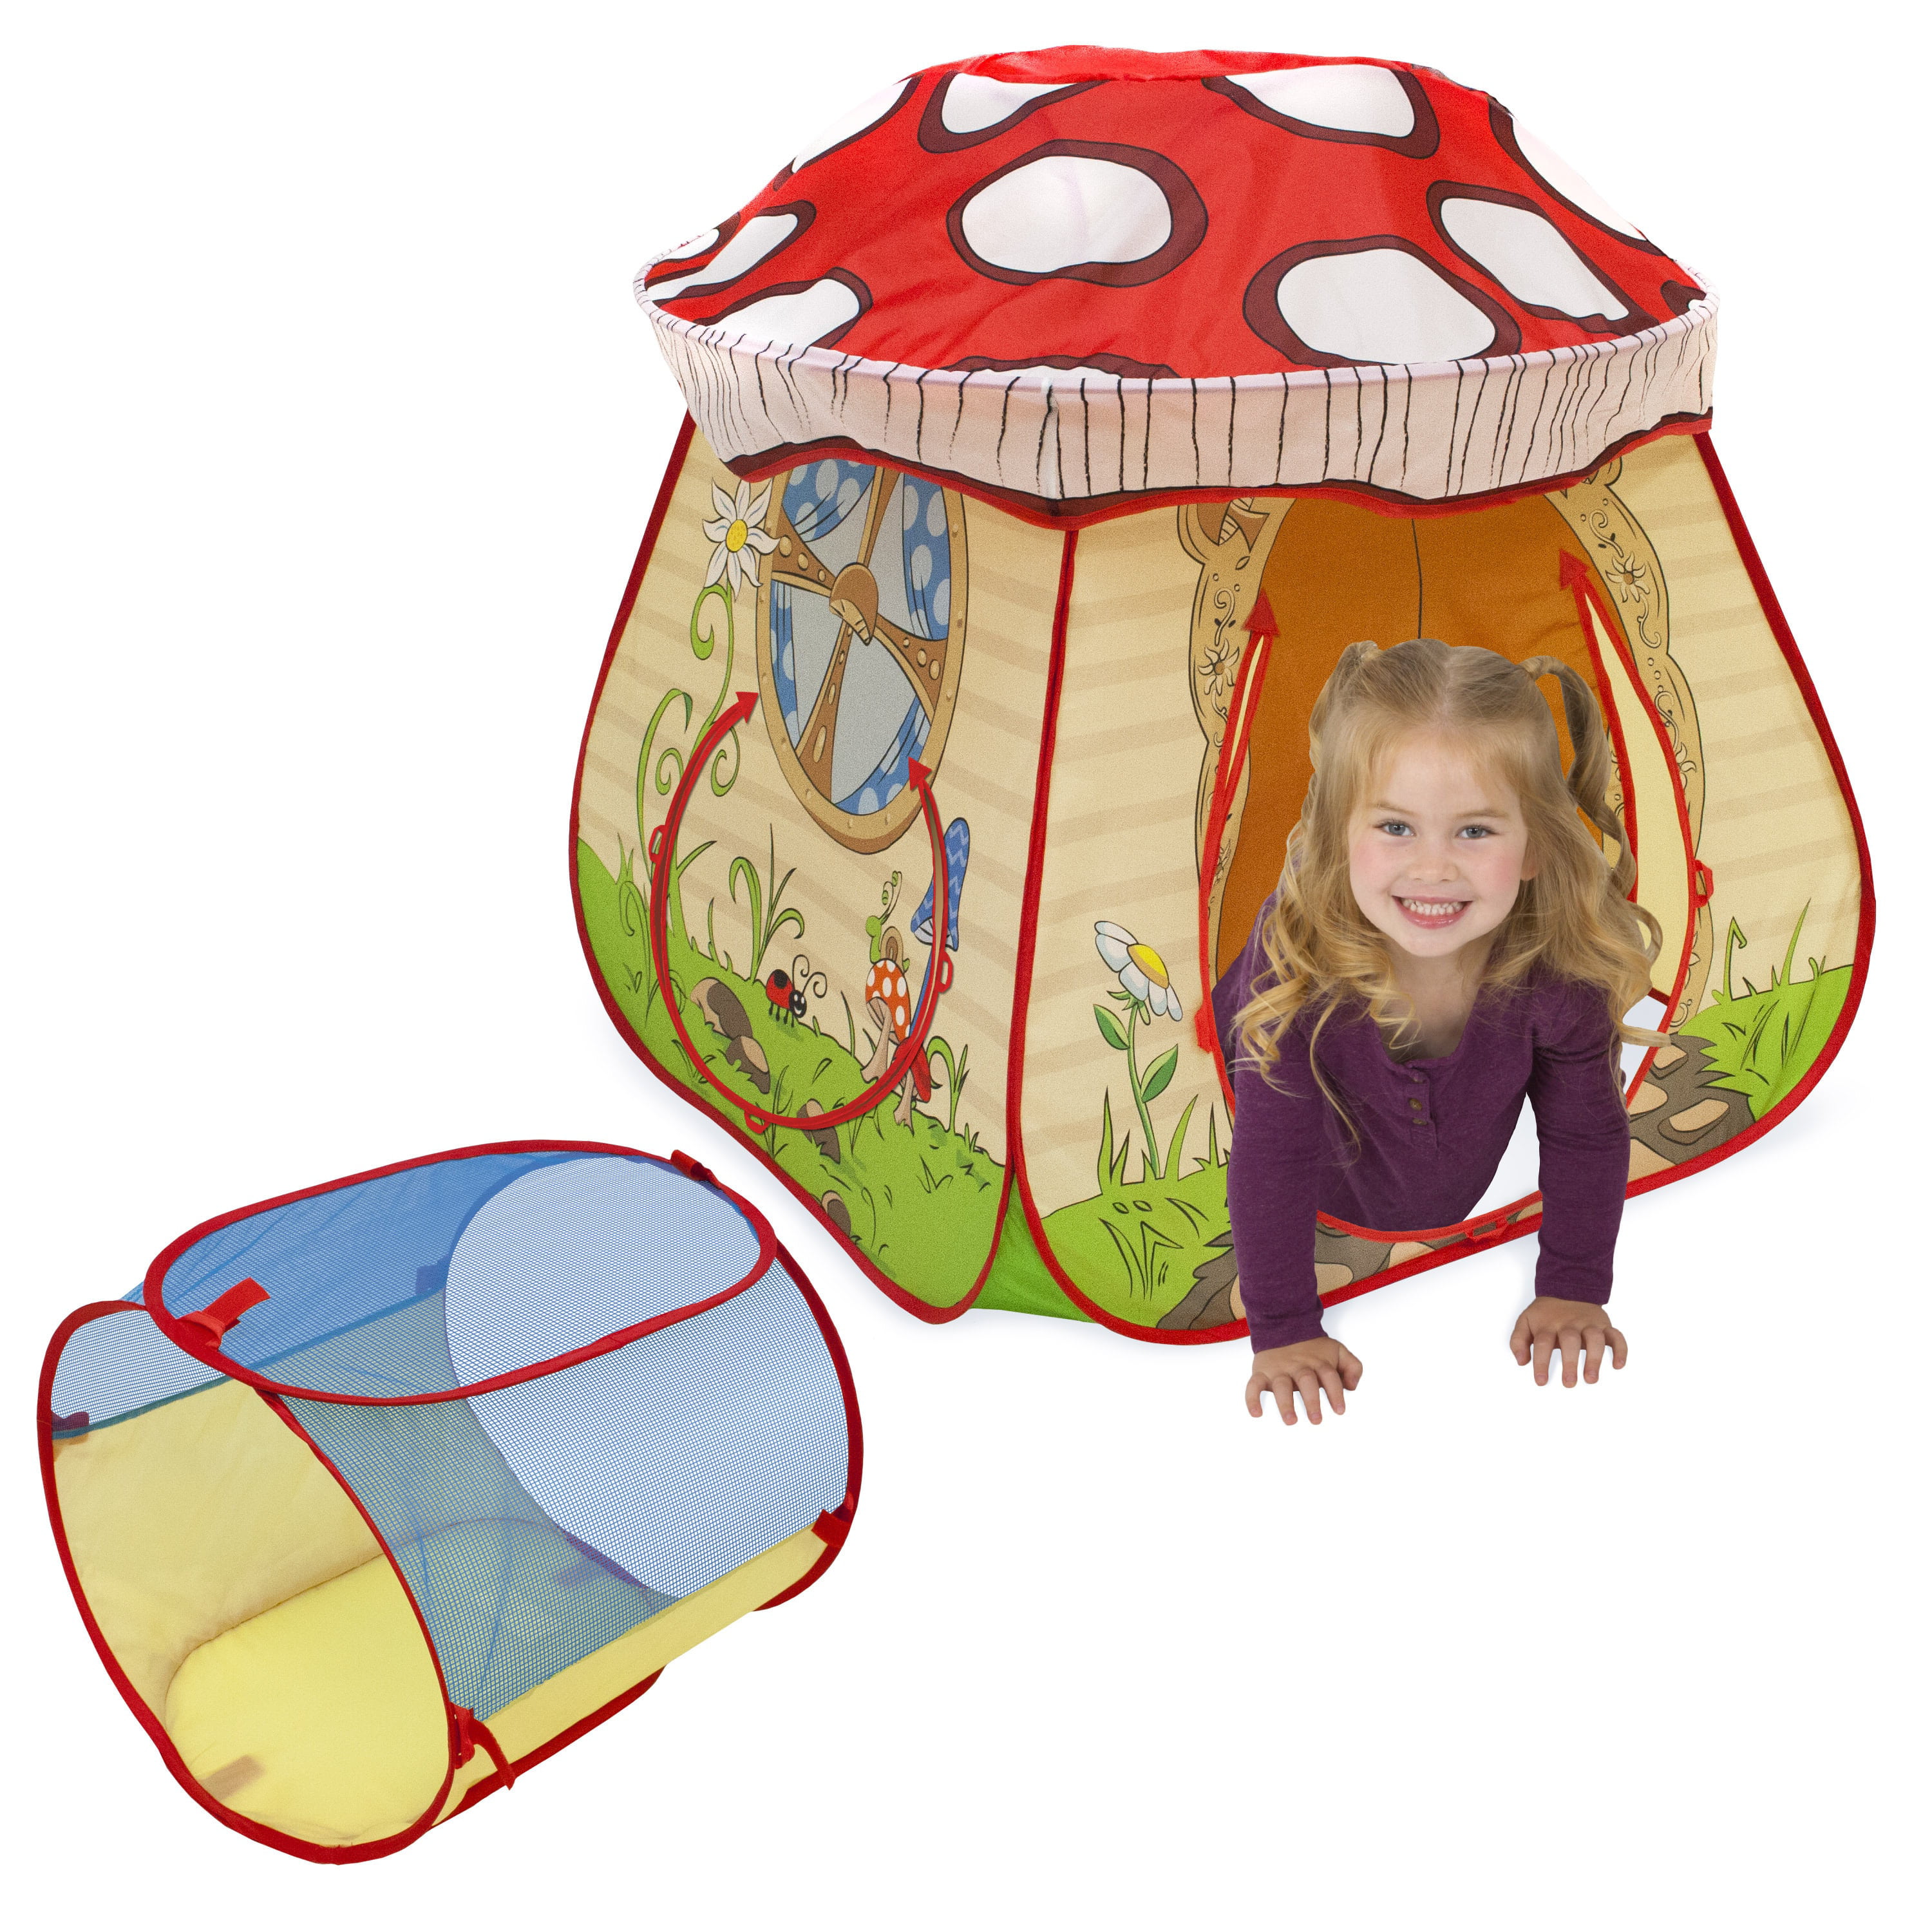 playhut tent and tunnel walmart